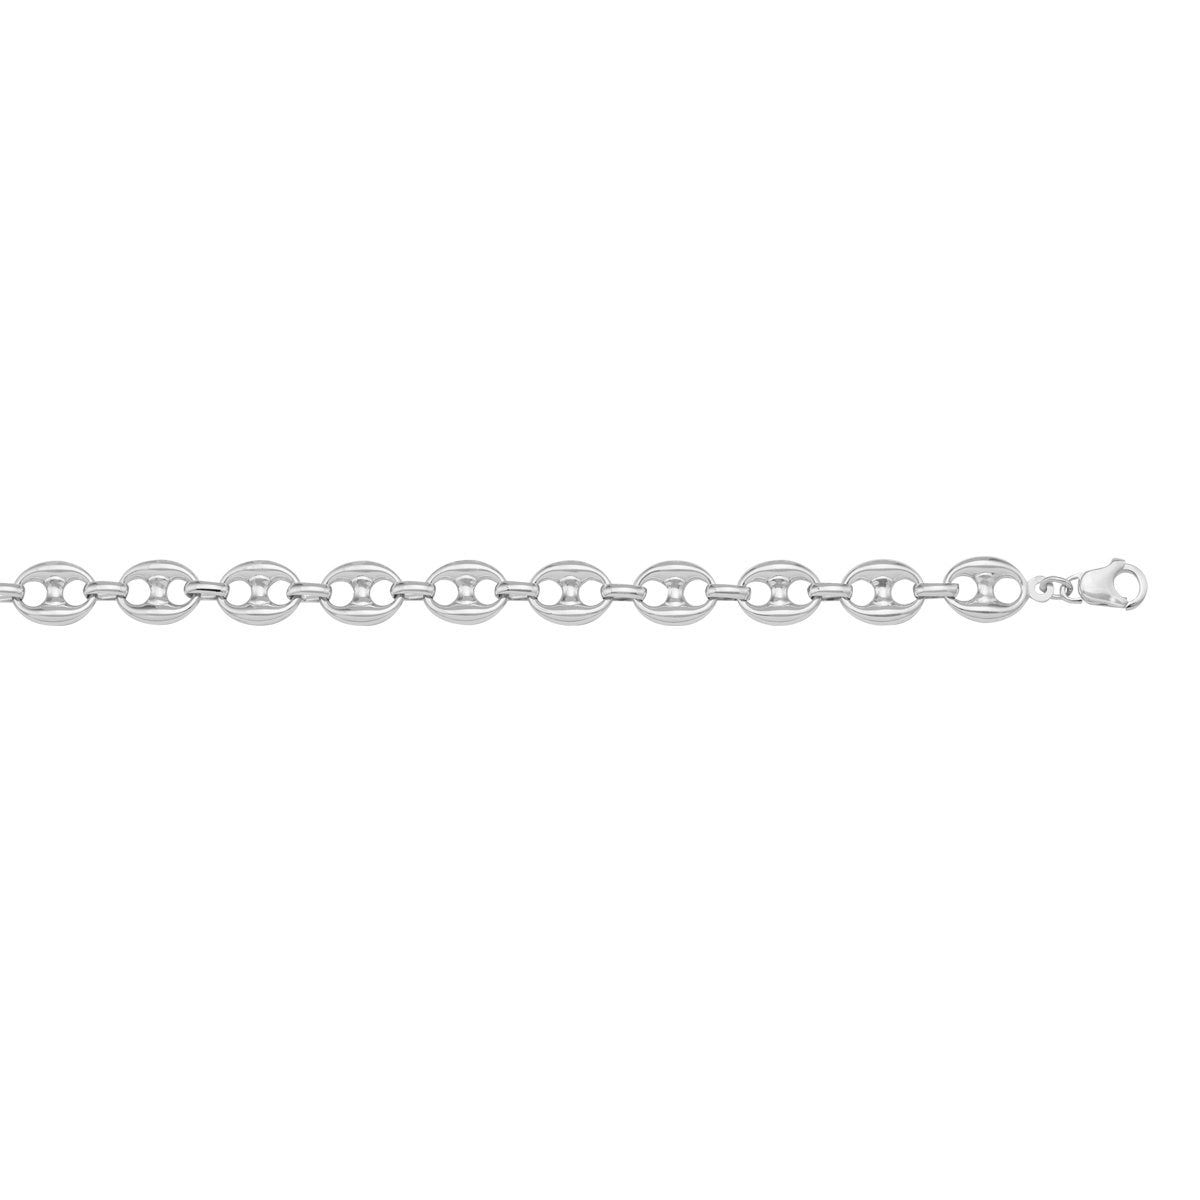 BRACELETS WHITE GOLD HOLLOW PUFFED ANCHOR LINK (LOBSTER CLASP) CHAIN